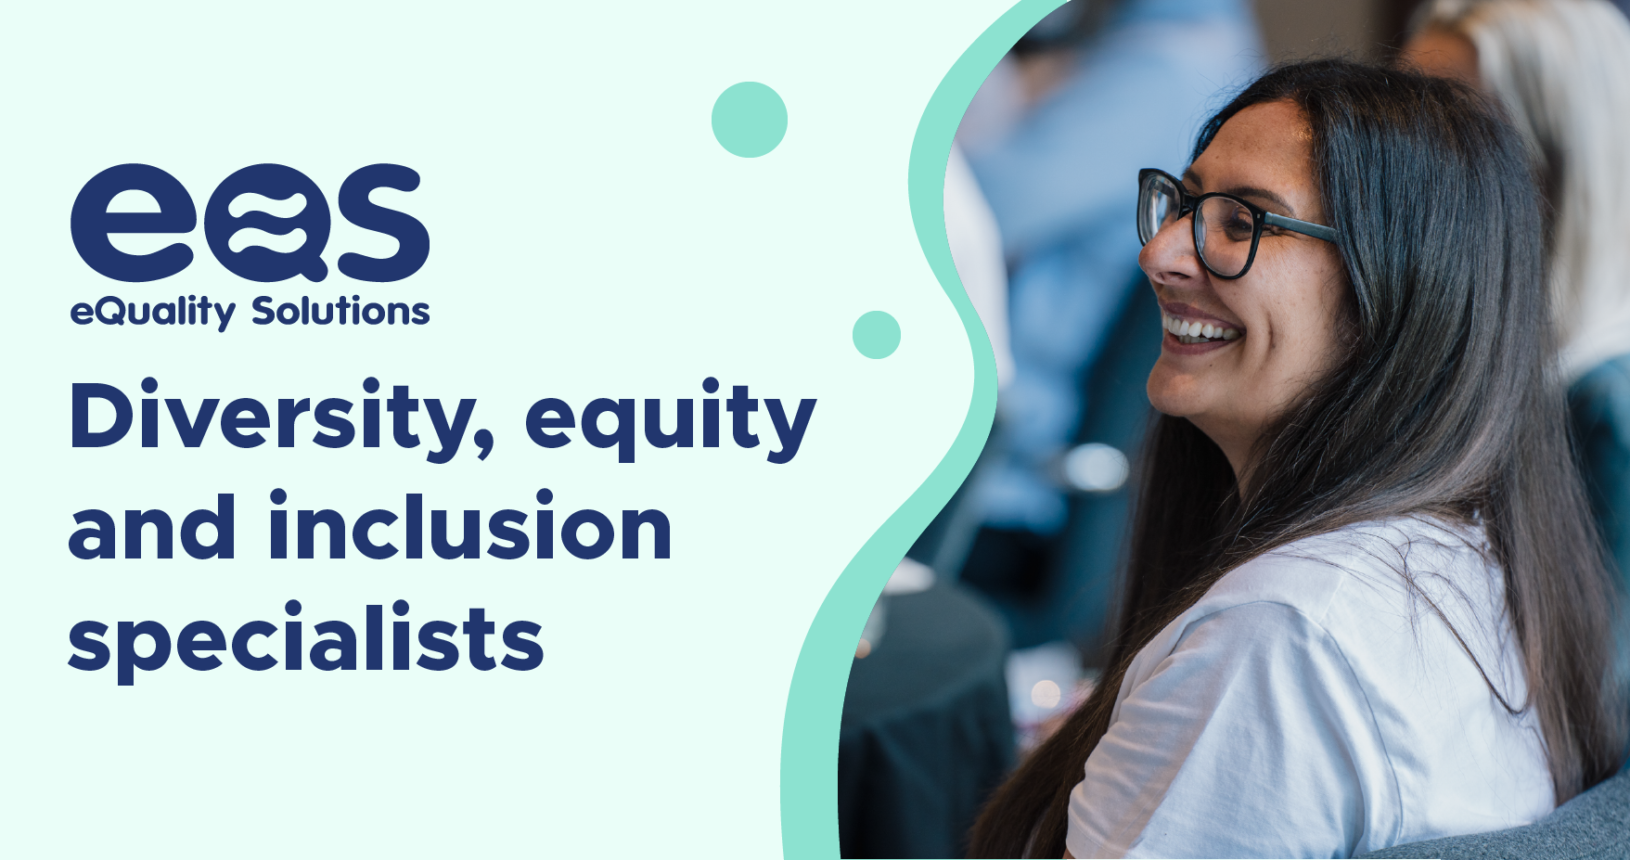 Banner image in eQS brand colours of navy blue and turquoise with the words: 'eQuality Solutions. Diversity, equity and inclusion specialists.' the right hand side of the image features an image of a woman with long dark hair and glasses, smiling.